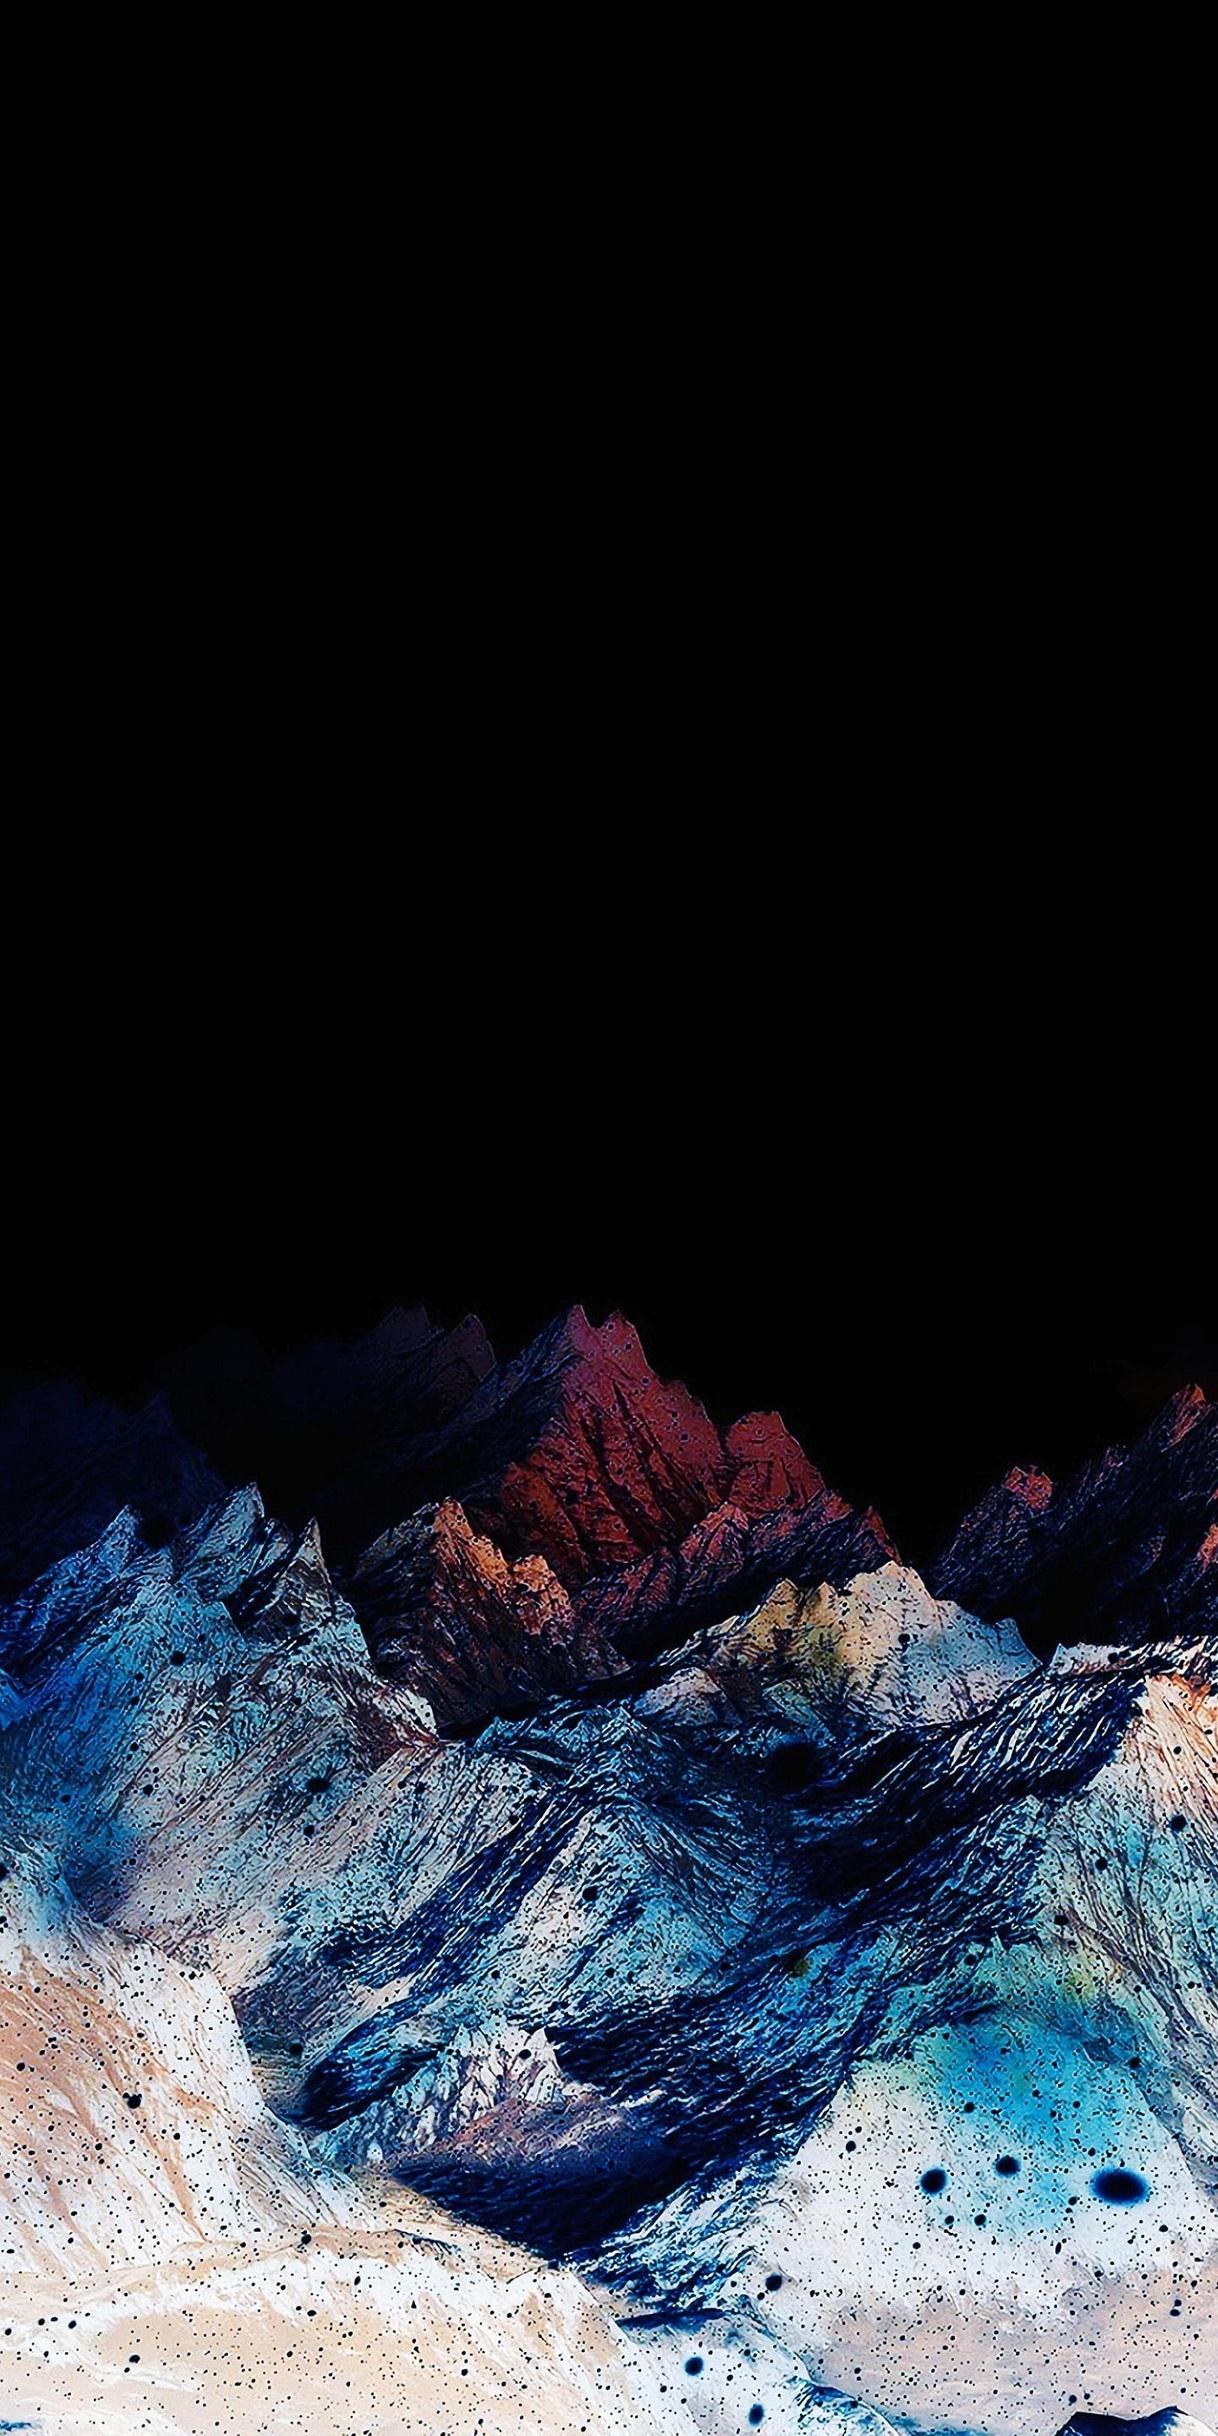 True Black And Oled Optimized Wallpapers For Iphone Xs